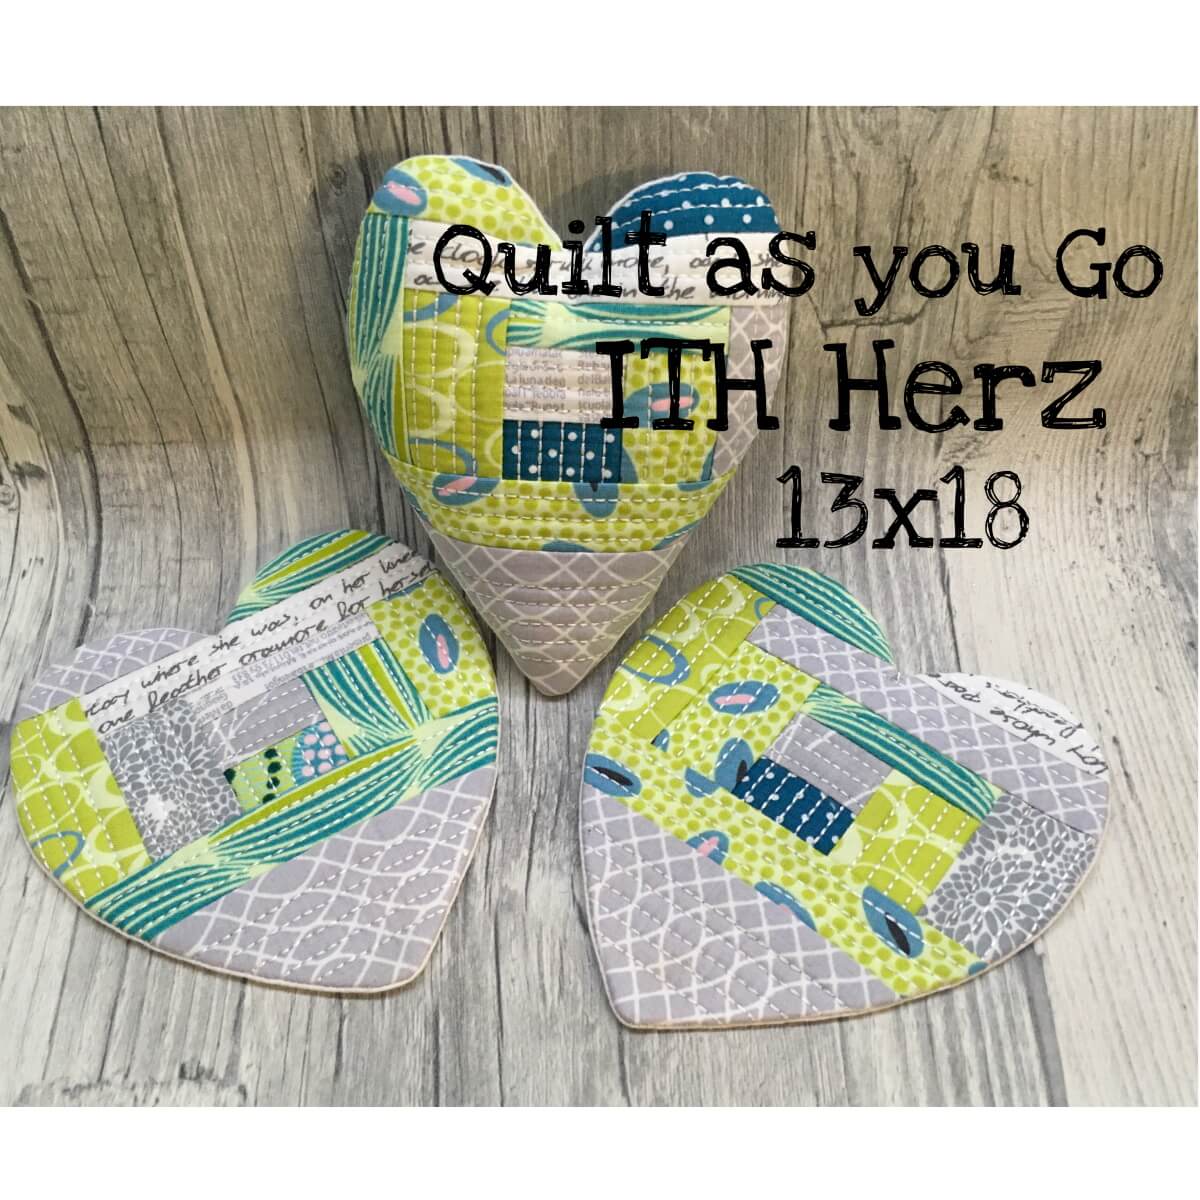 ITH Herz "Quilt as you go" Freebie